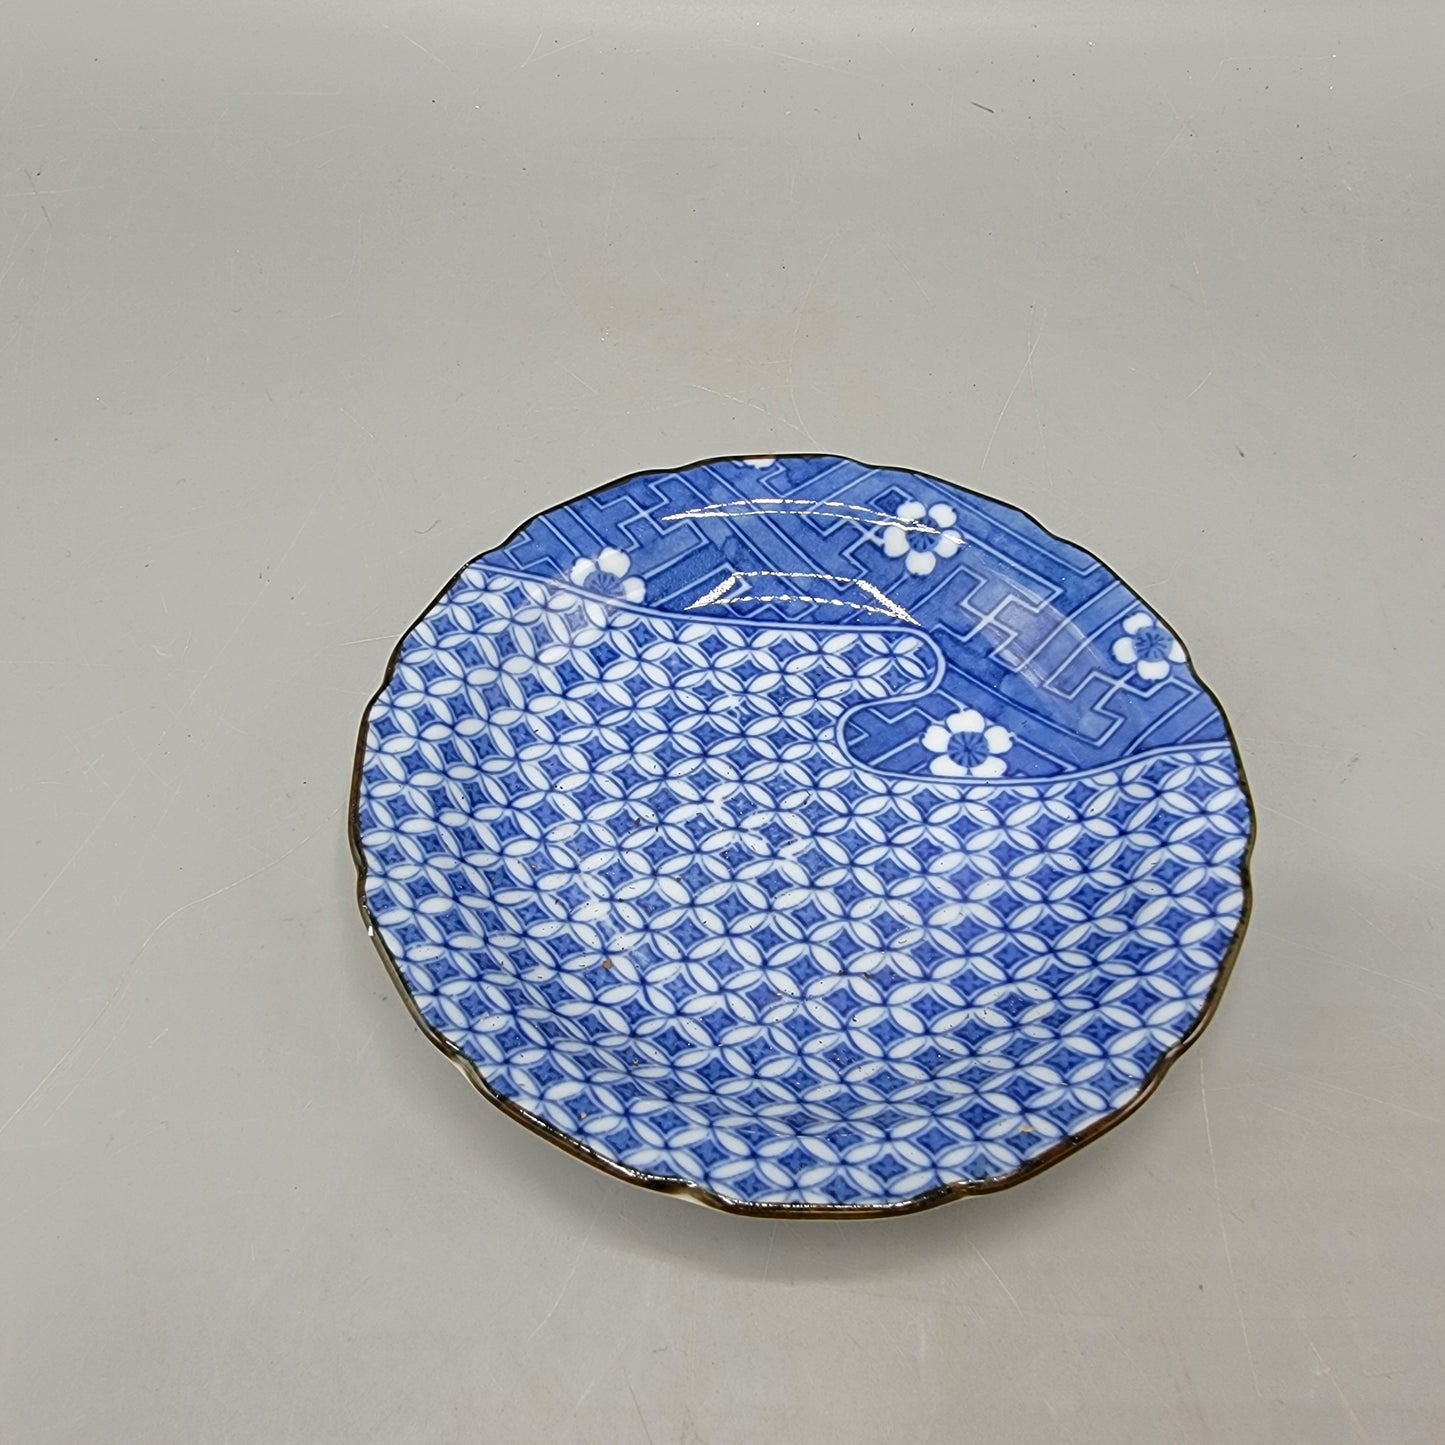 Japanese Blue and White Porcelain Diaper Pattern Plate